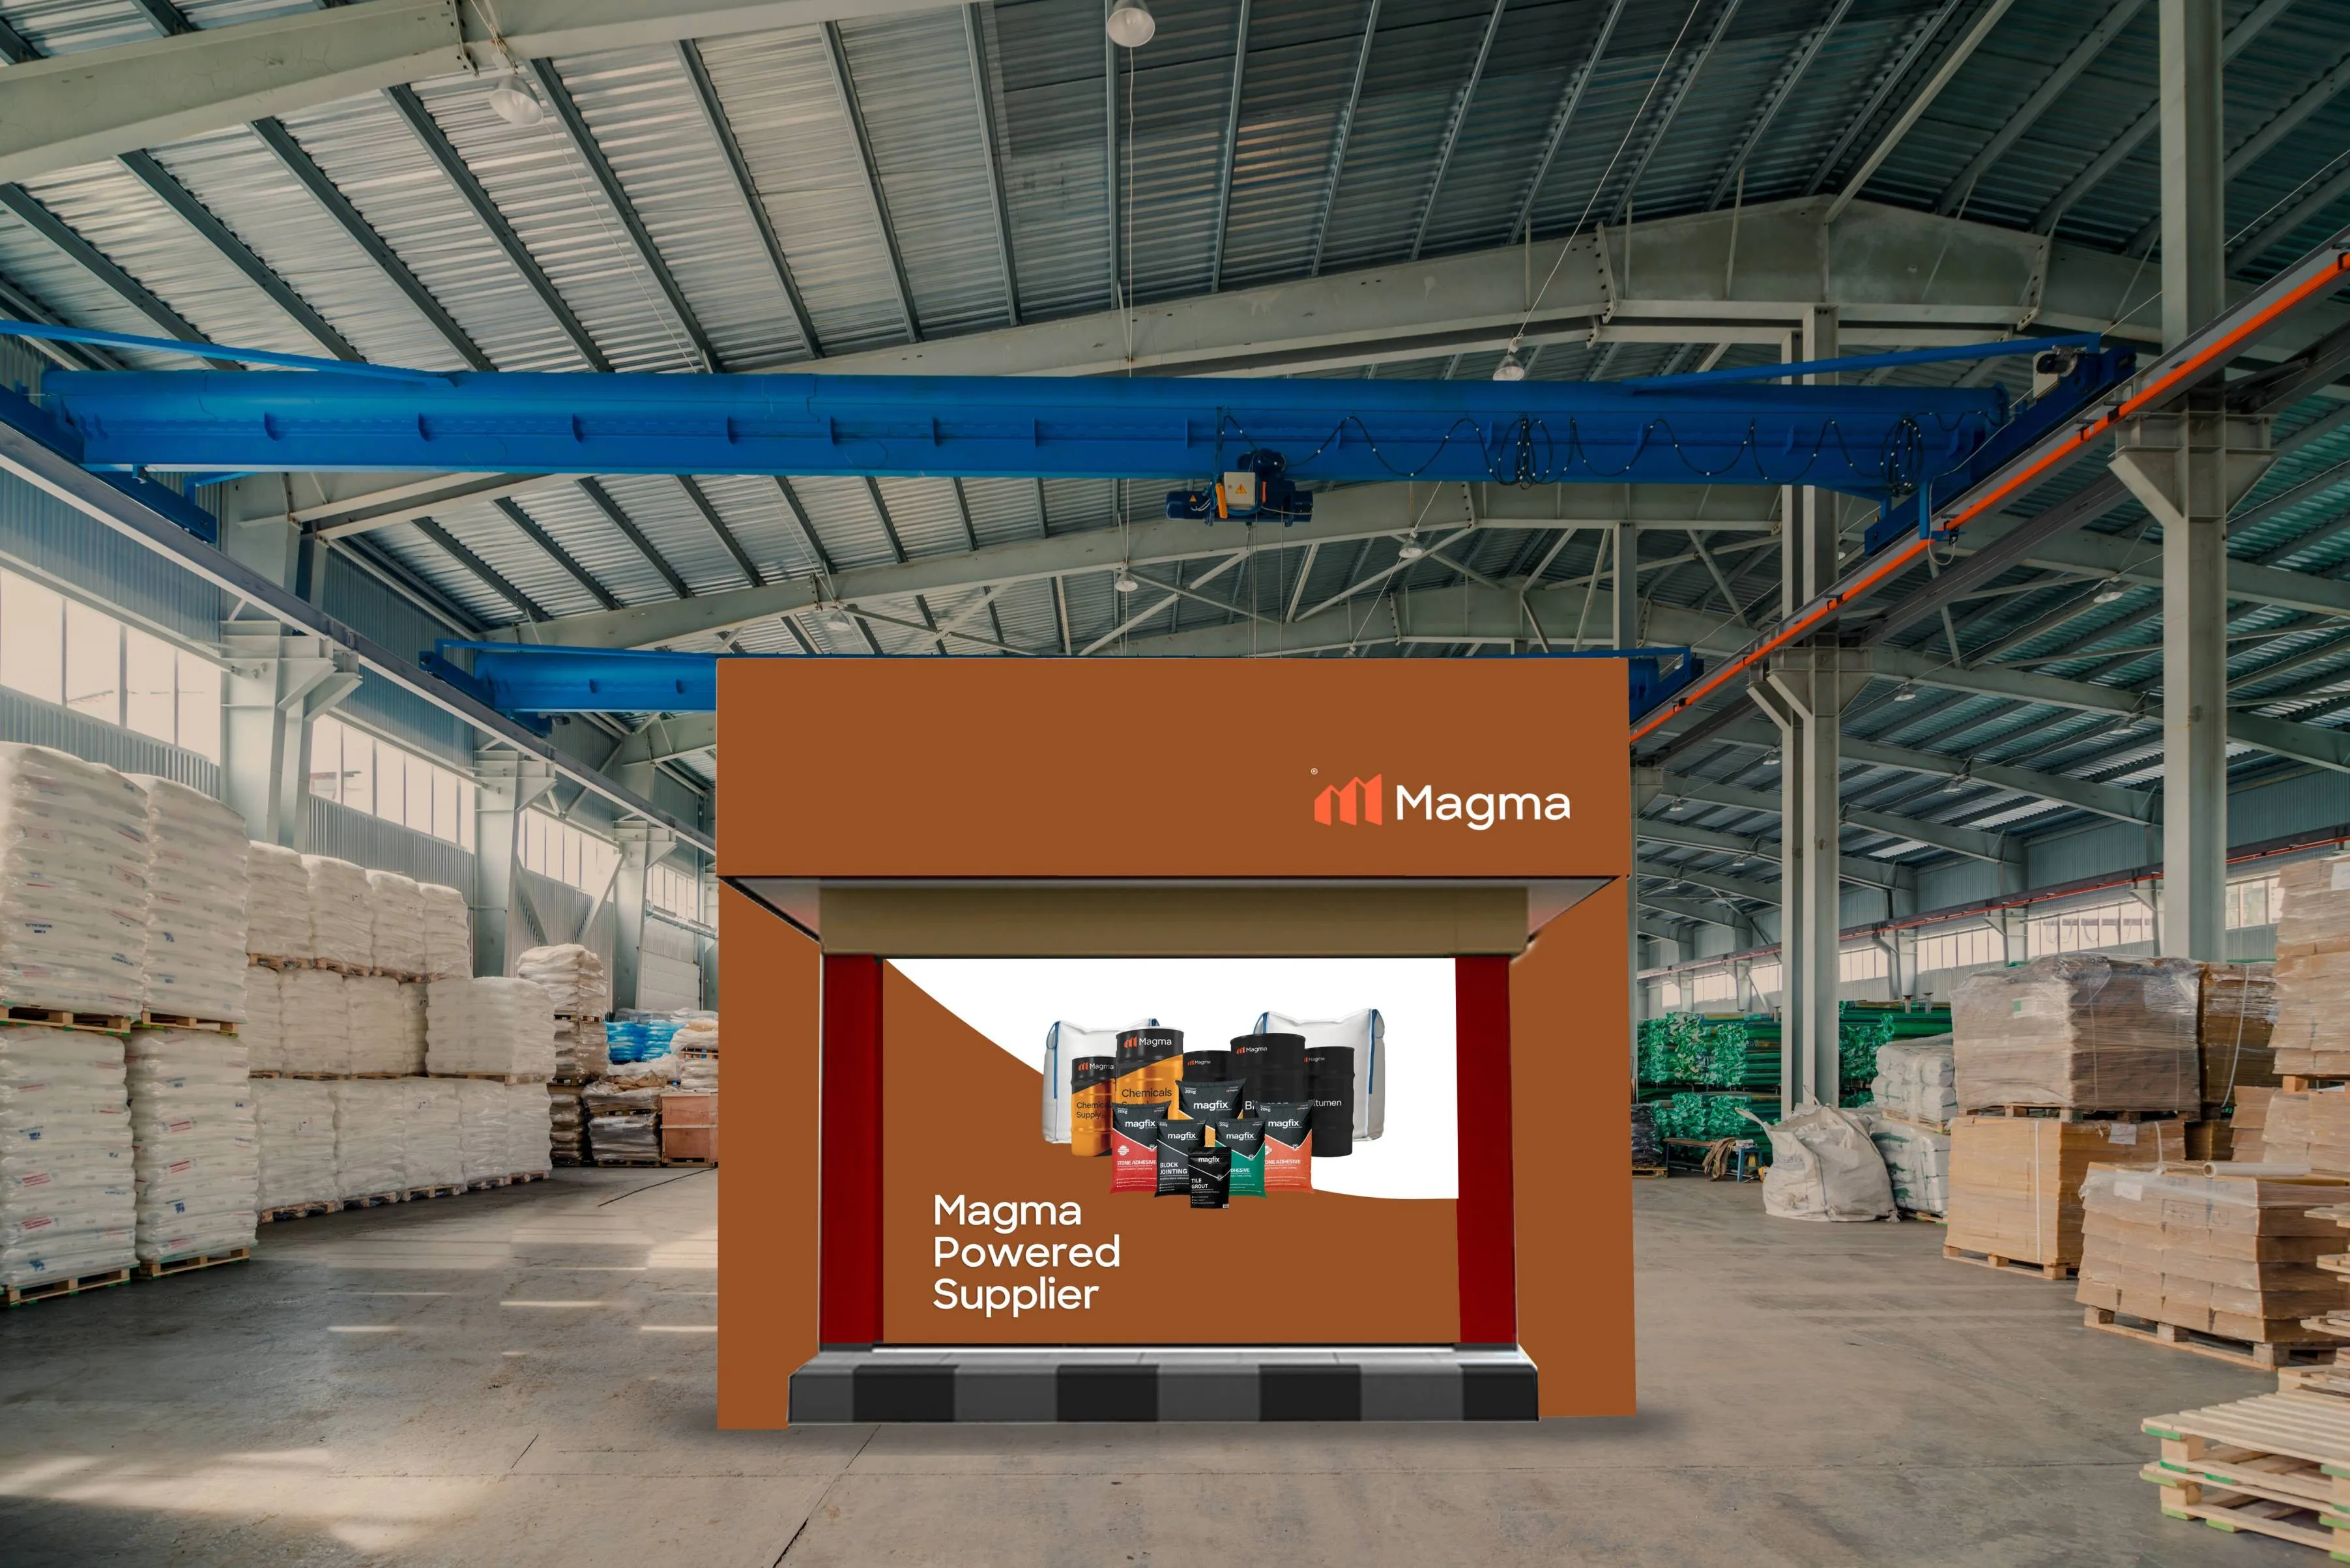 Magma Powered Supplier